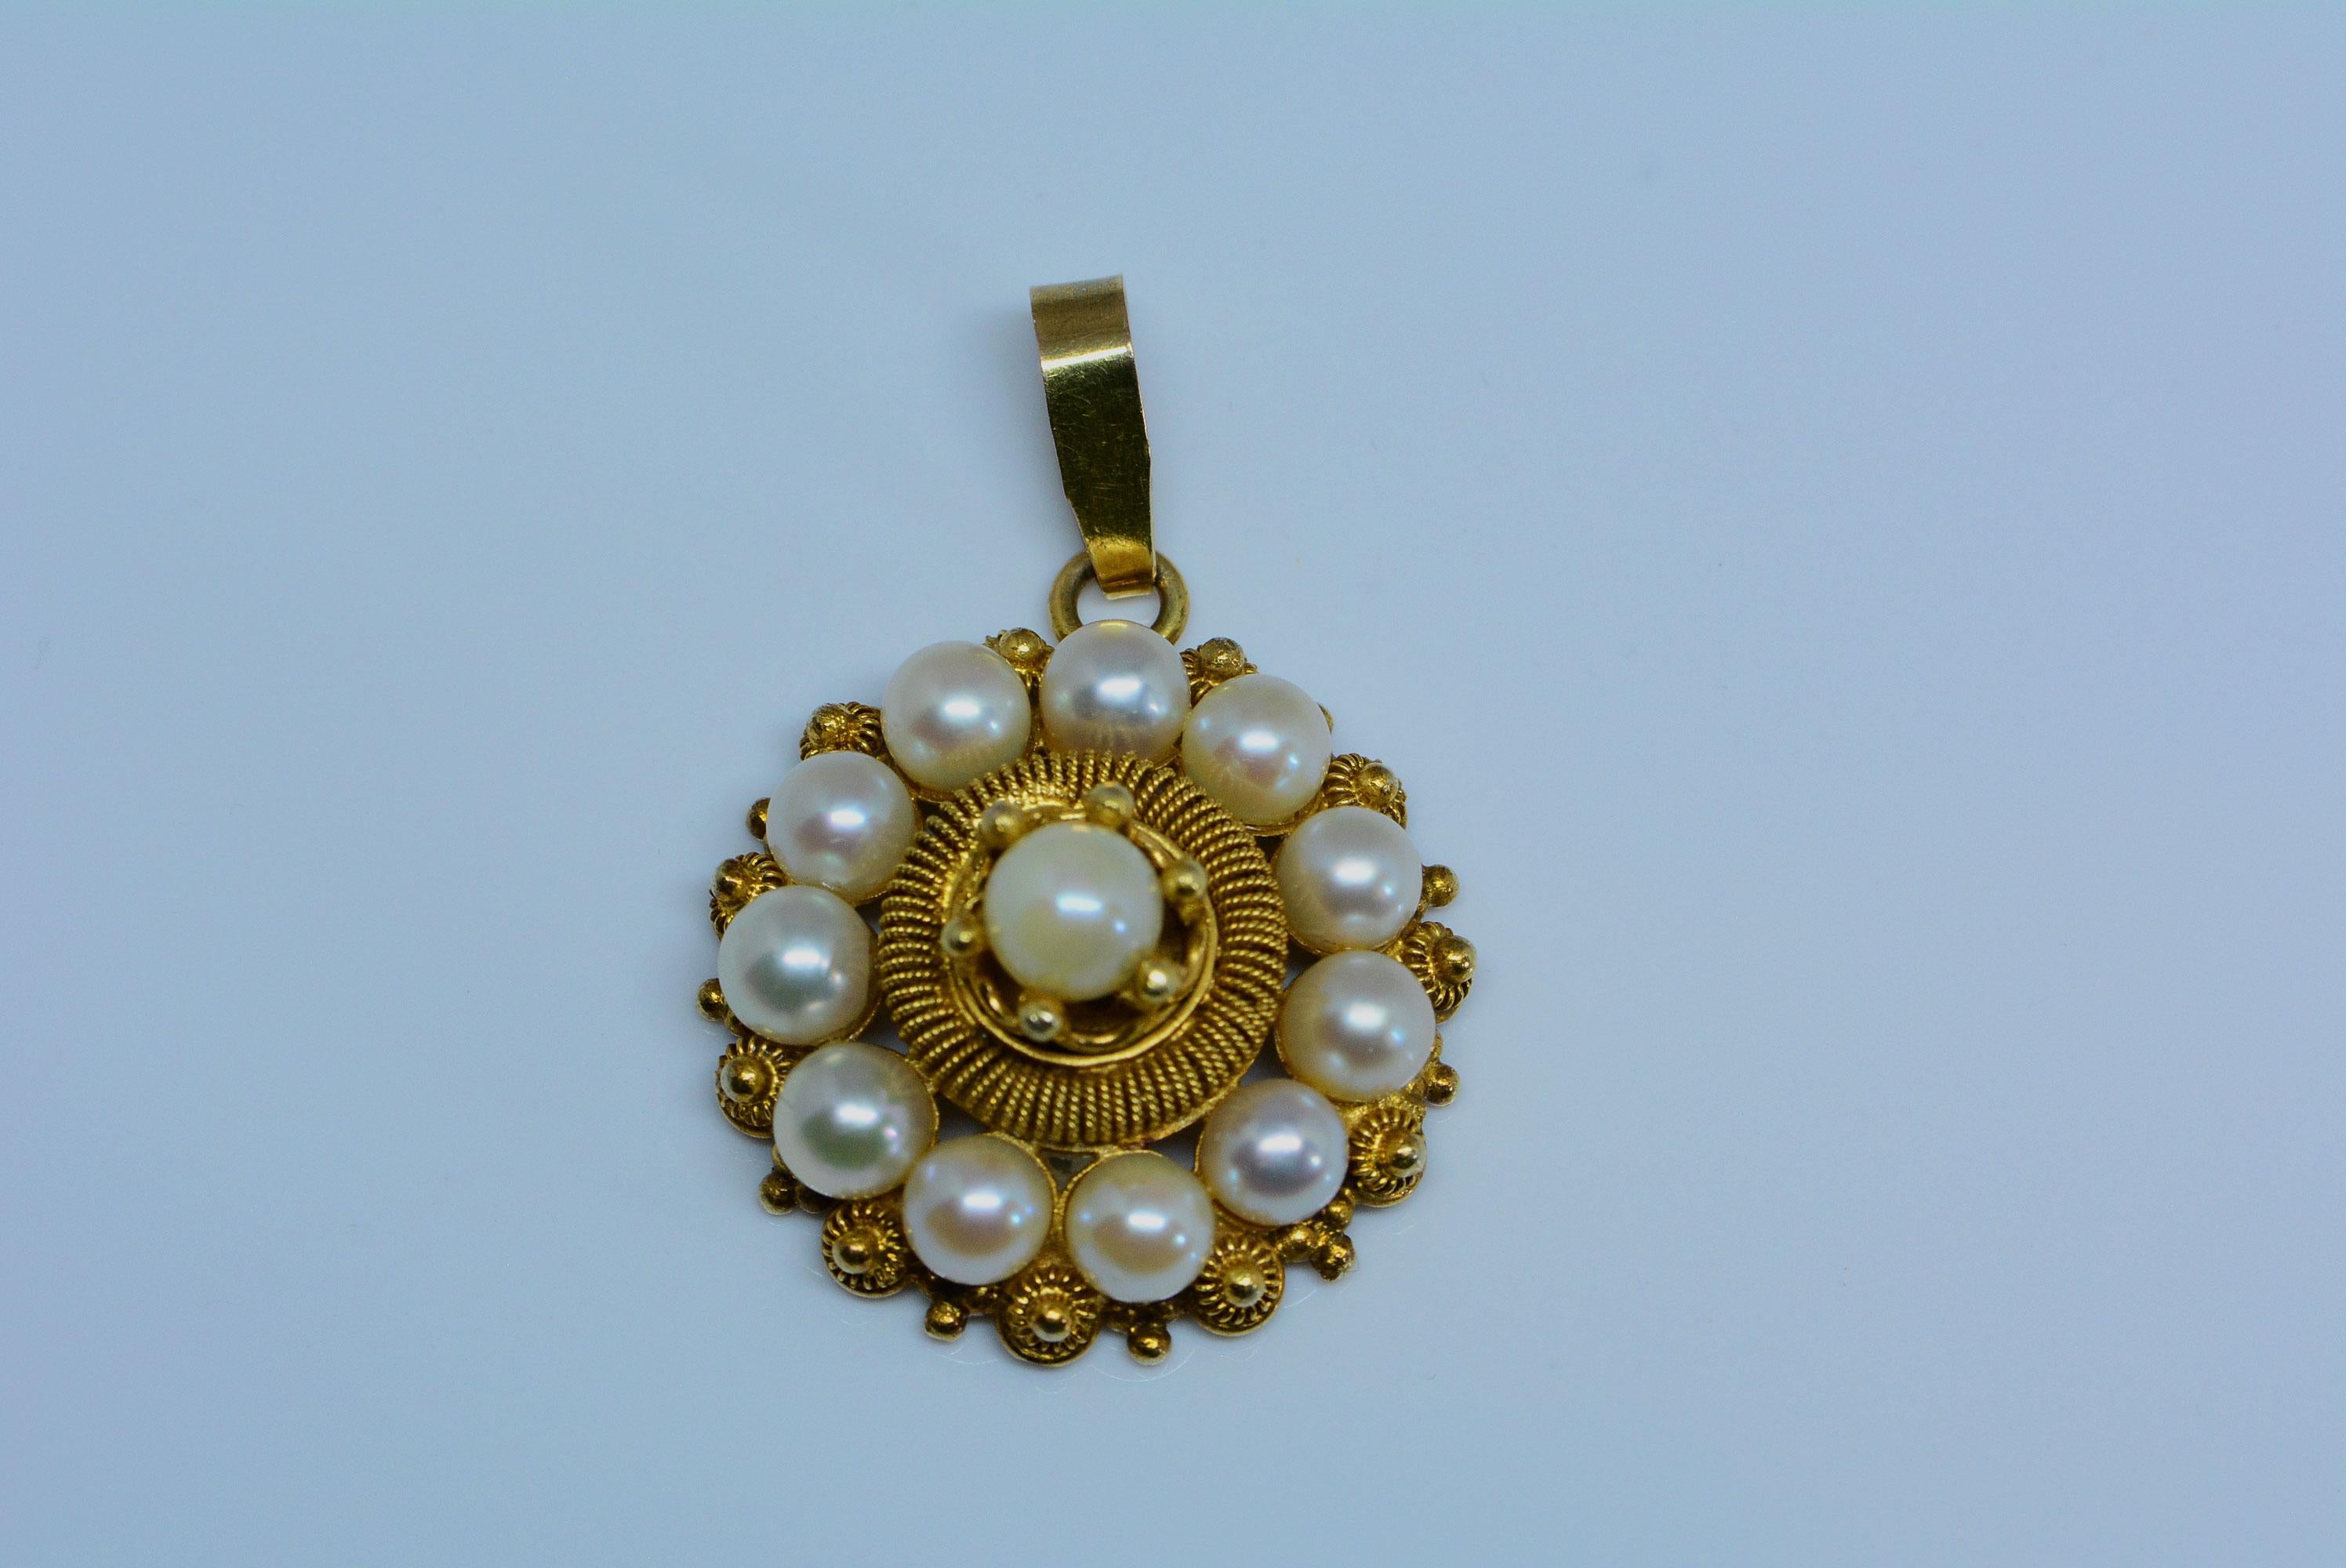 You don't come across these everyday.
The workmanship to make cannetille jewellery is quite difficult and considered a lost art in jewellery making. 
The cultured pearls may have been replaced at some point in time- it is possible the originals were